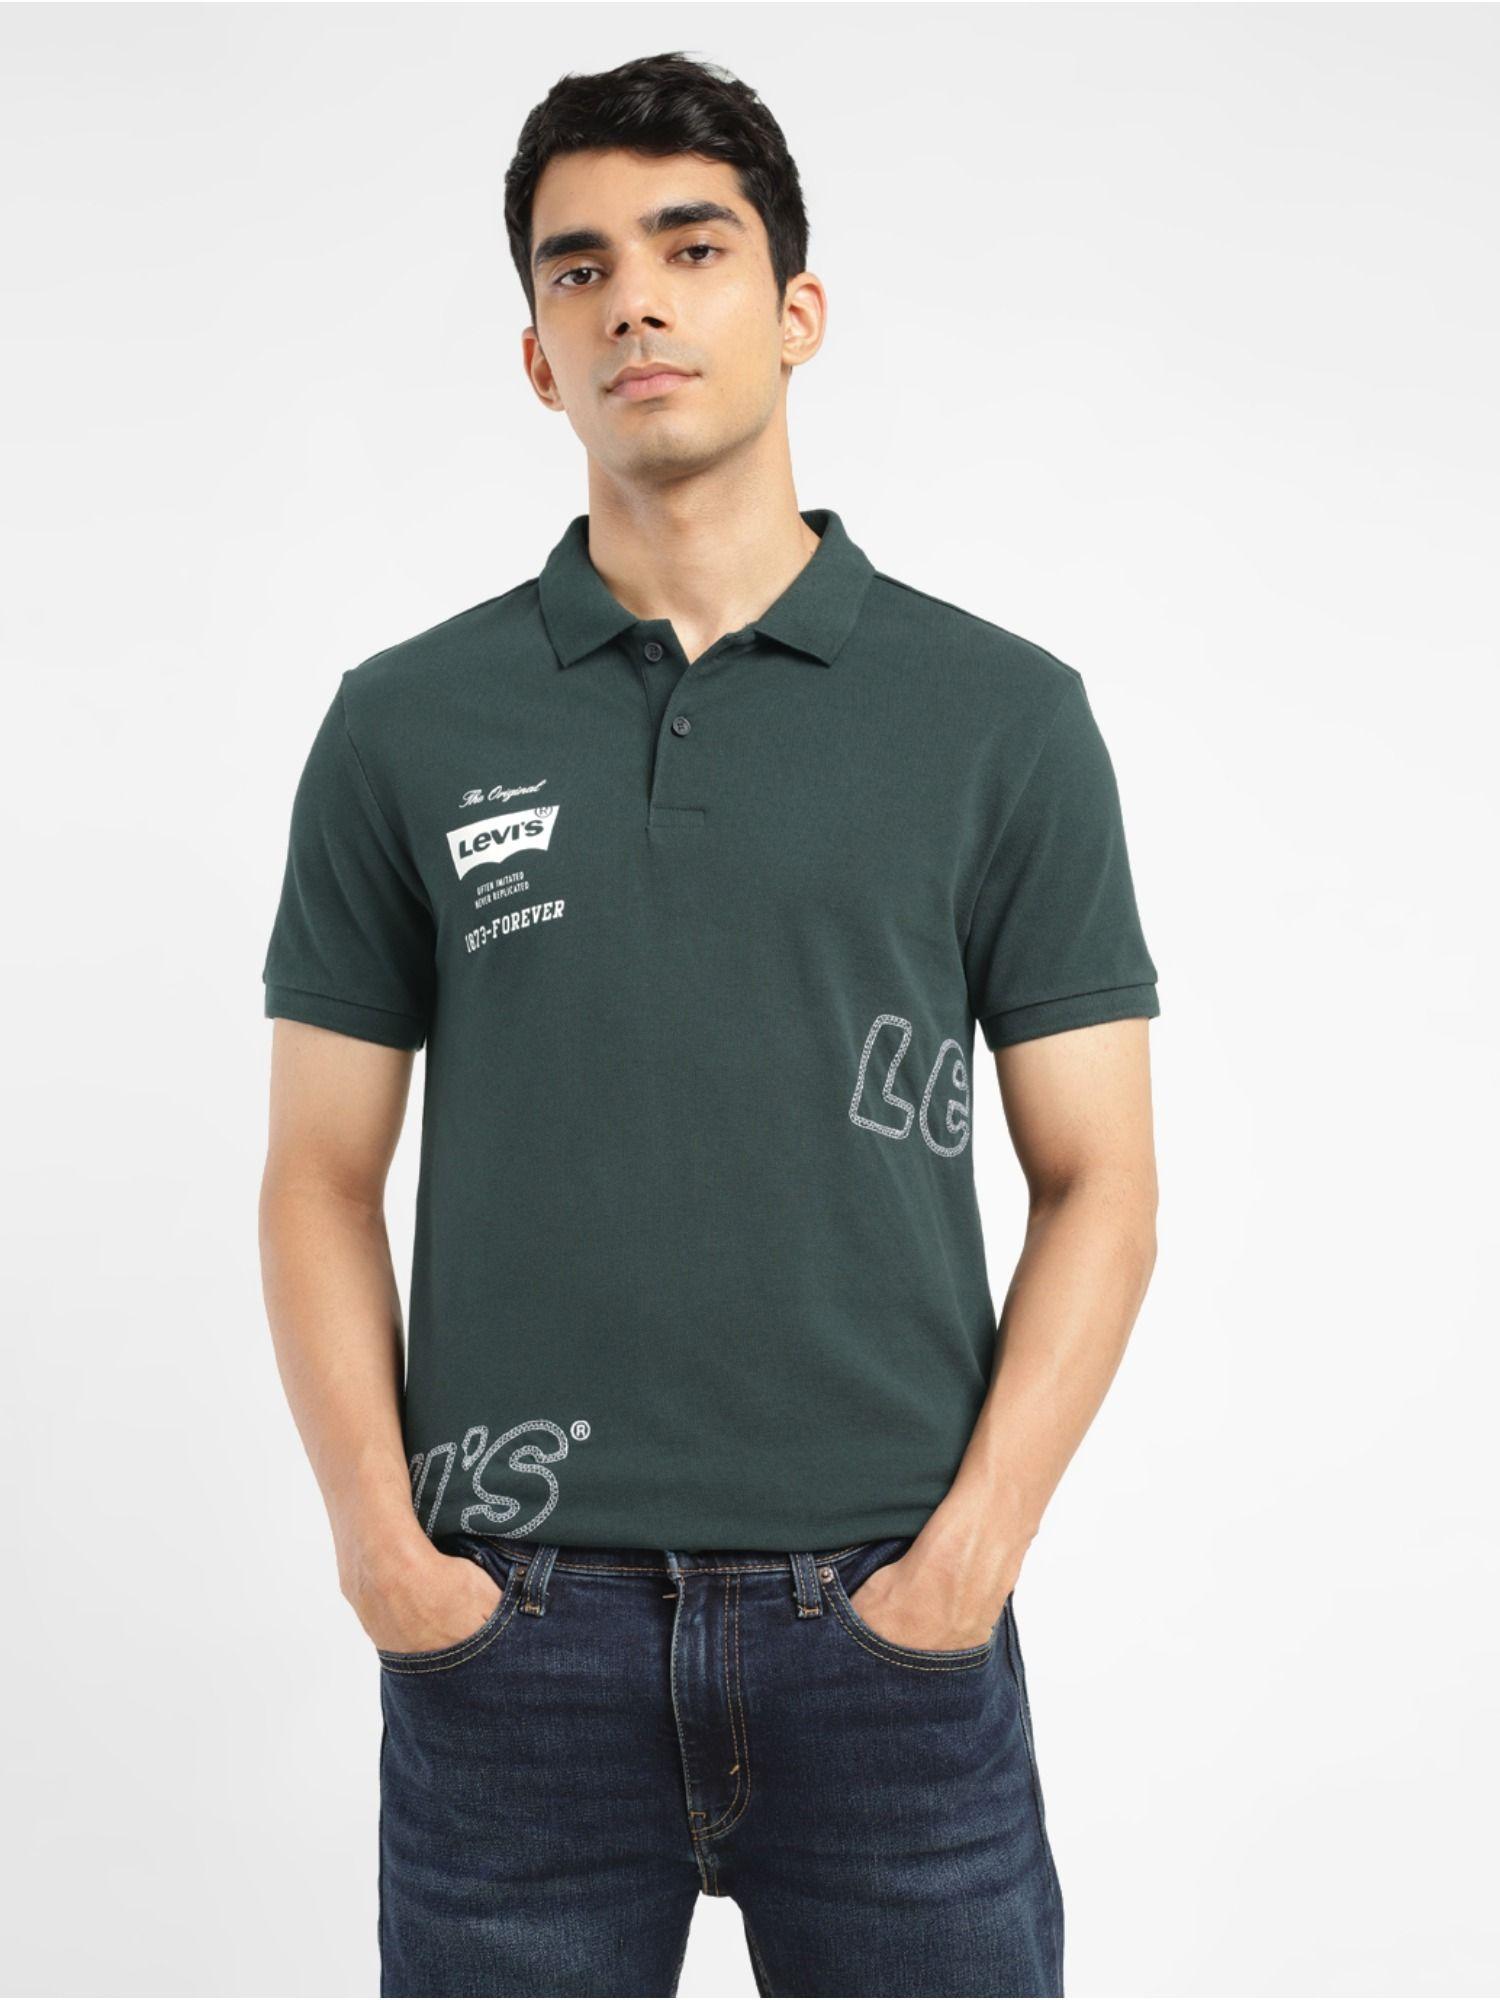 men's-olive-printed-polo-collar-t-shirt